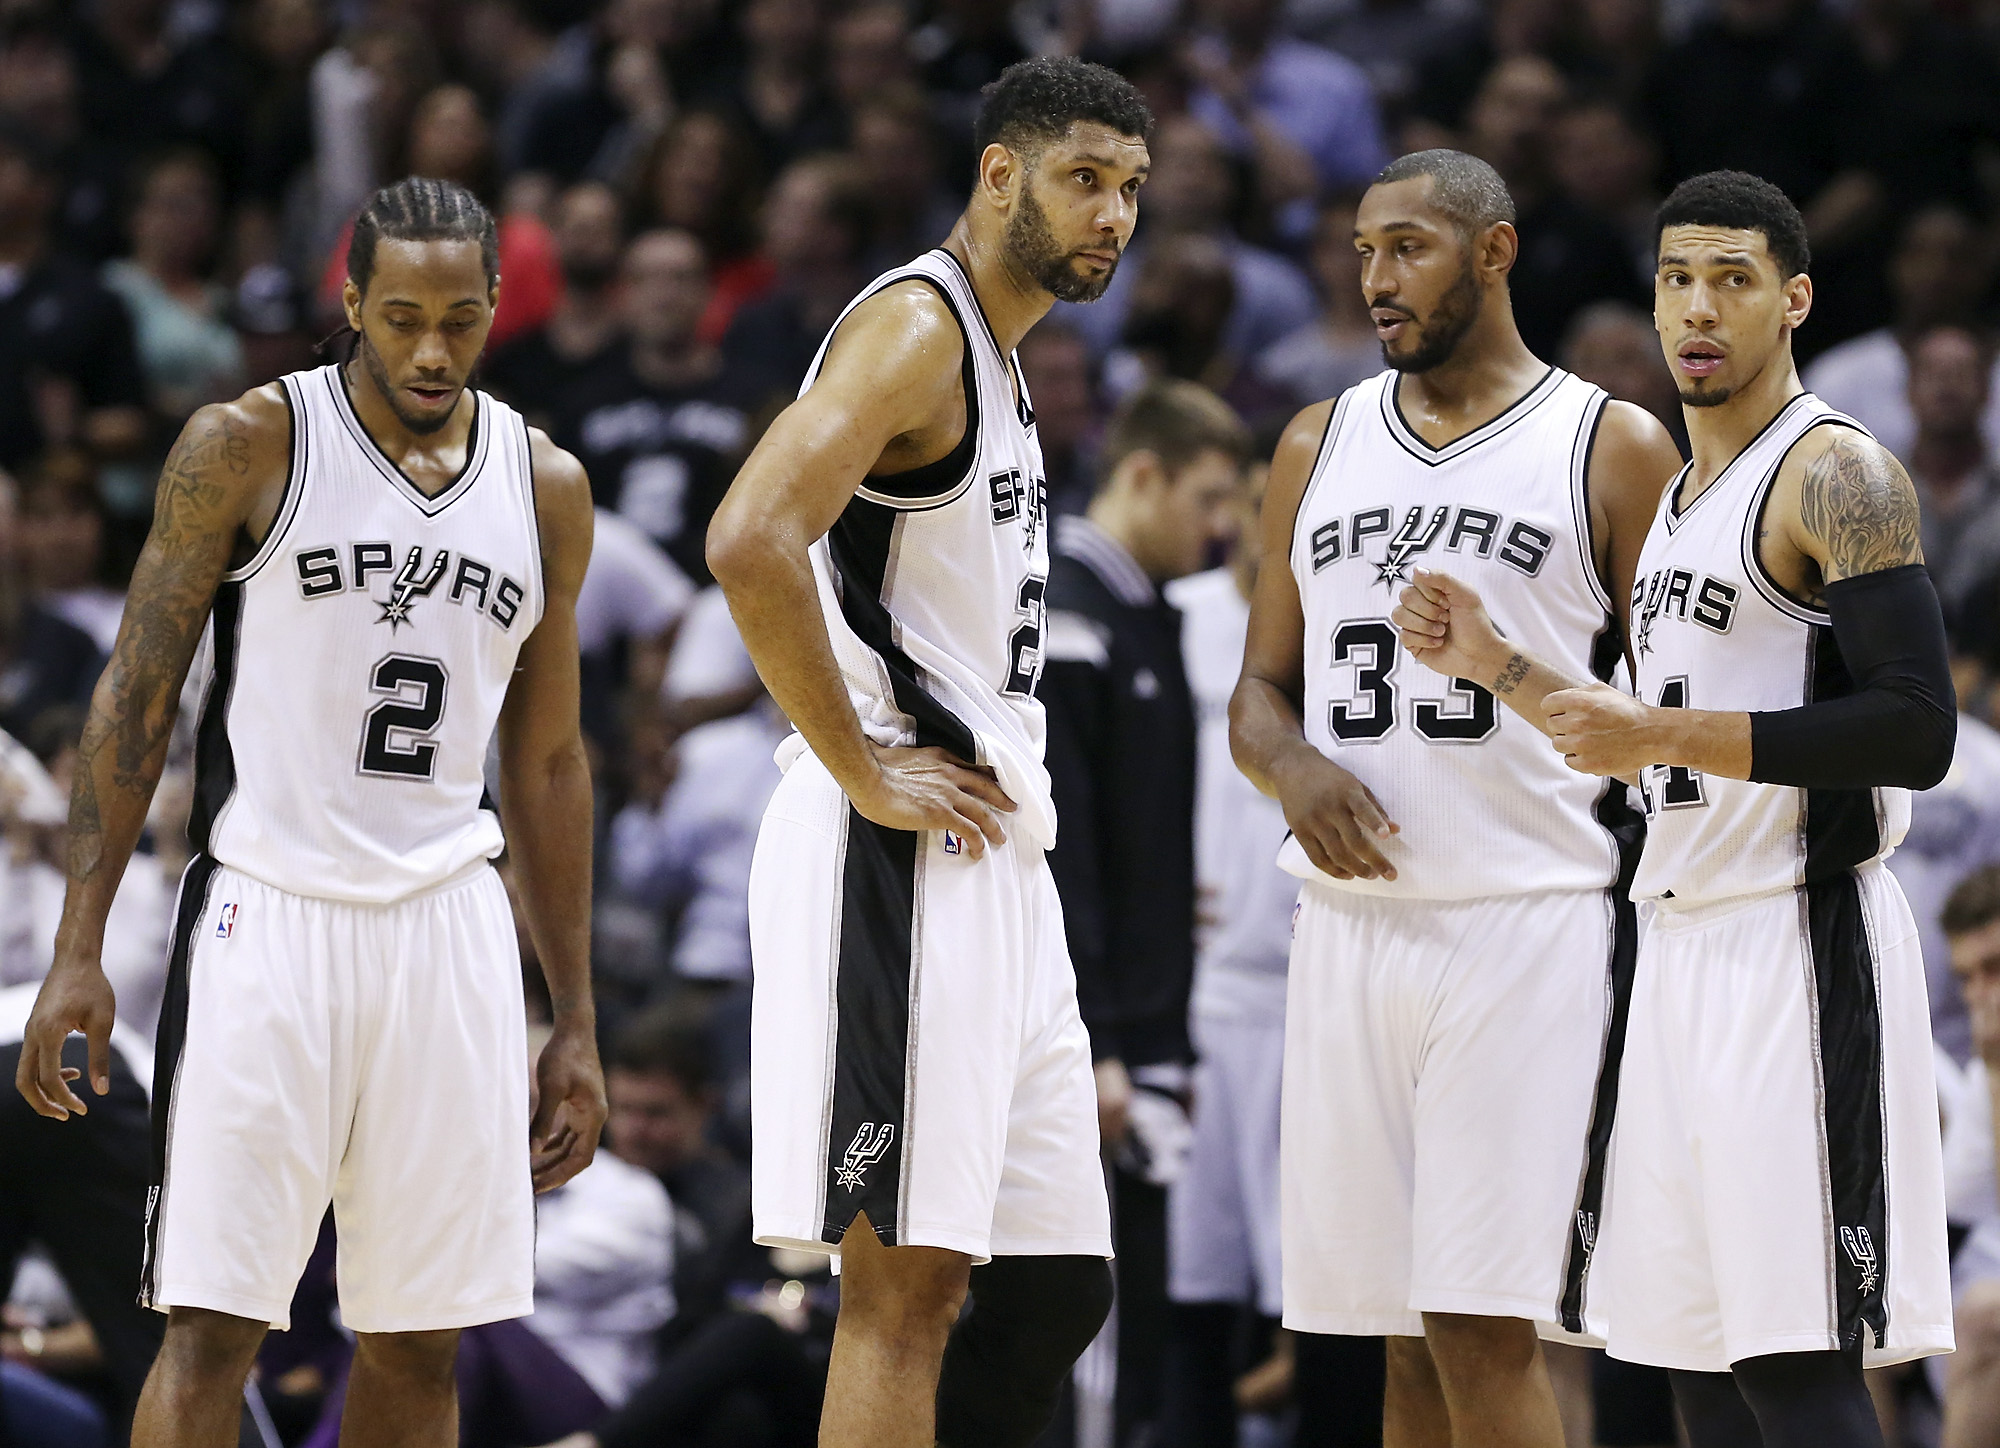 Boris Diaw signs three-year deal with Spurs